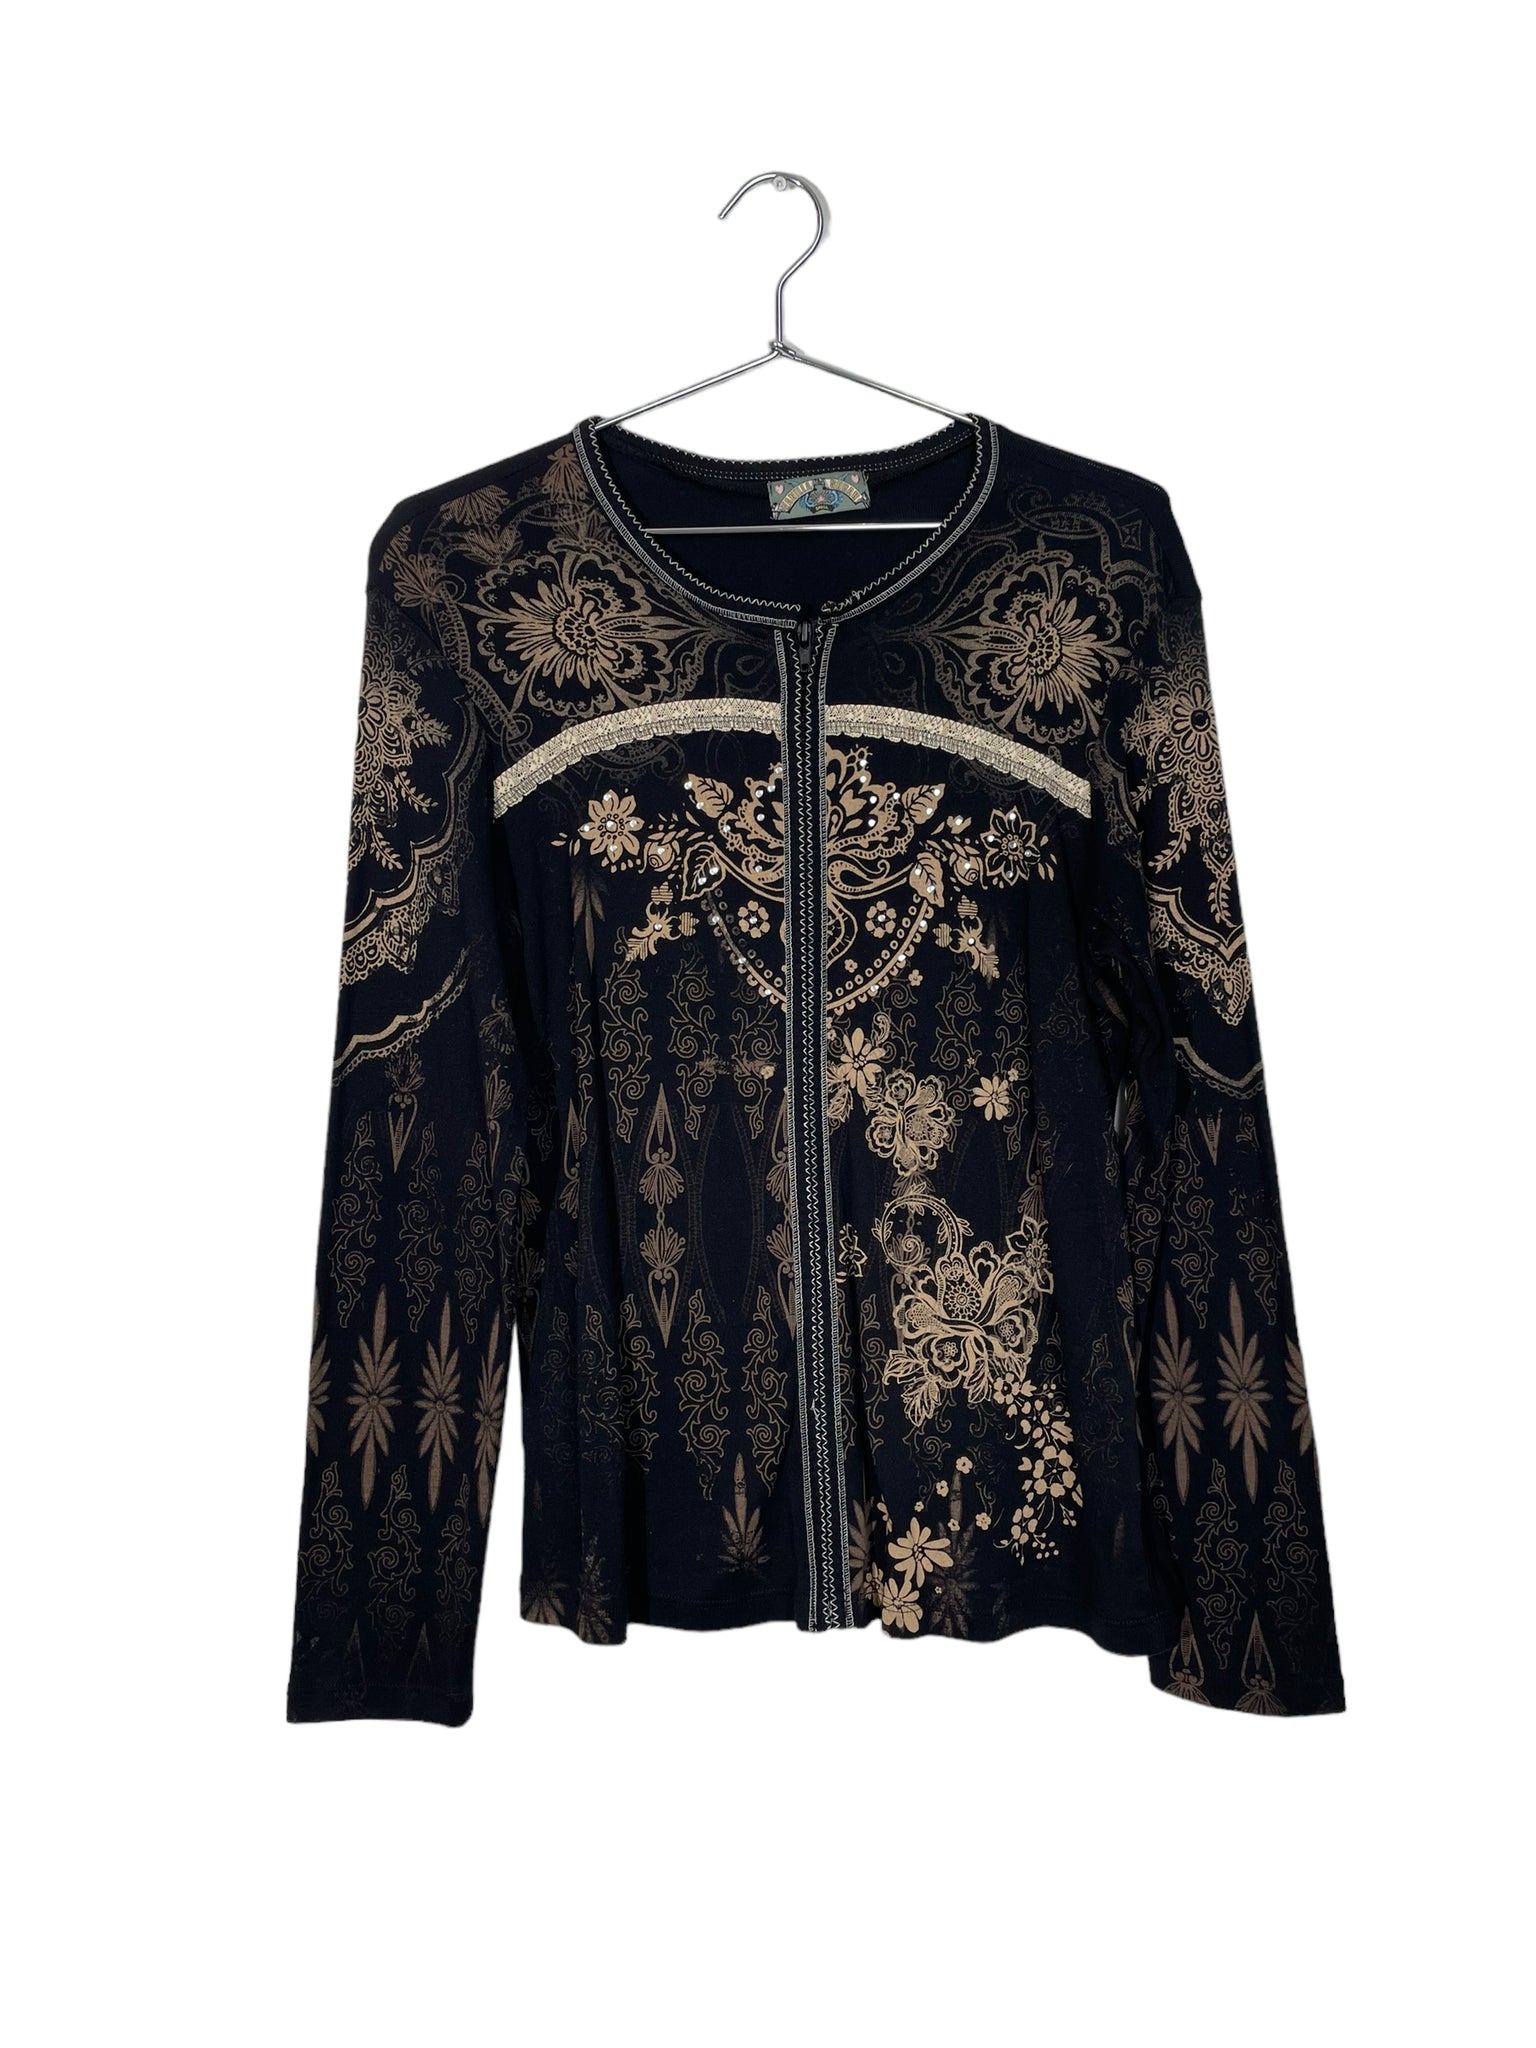 Black Cardigan Sweater With Floral Graphic